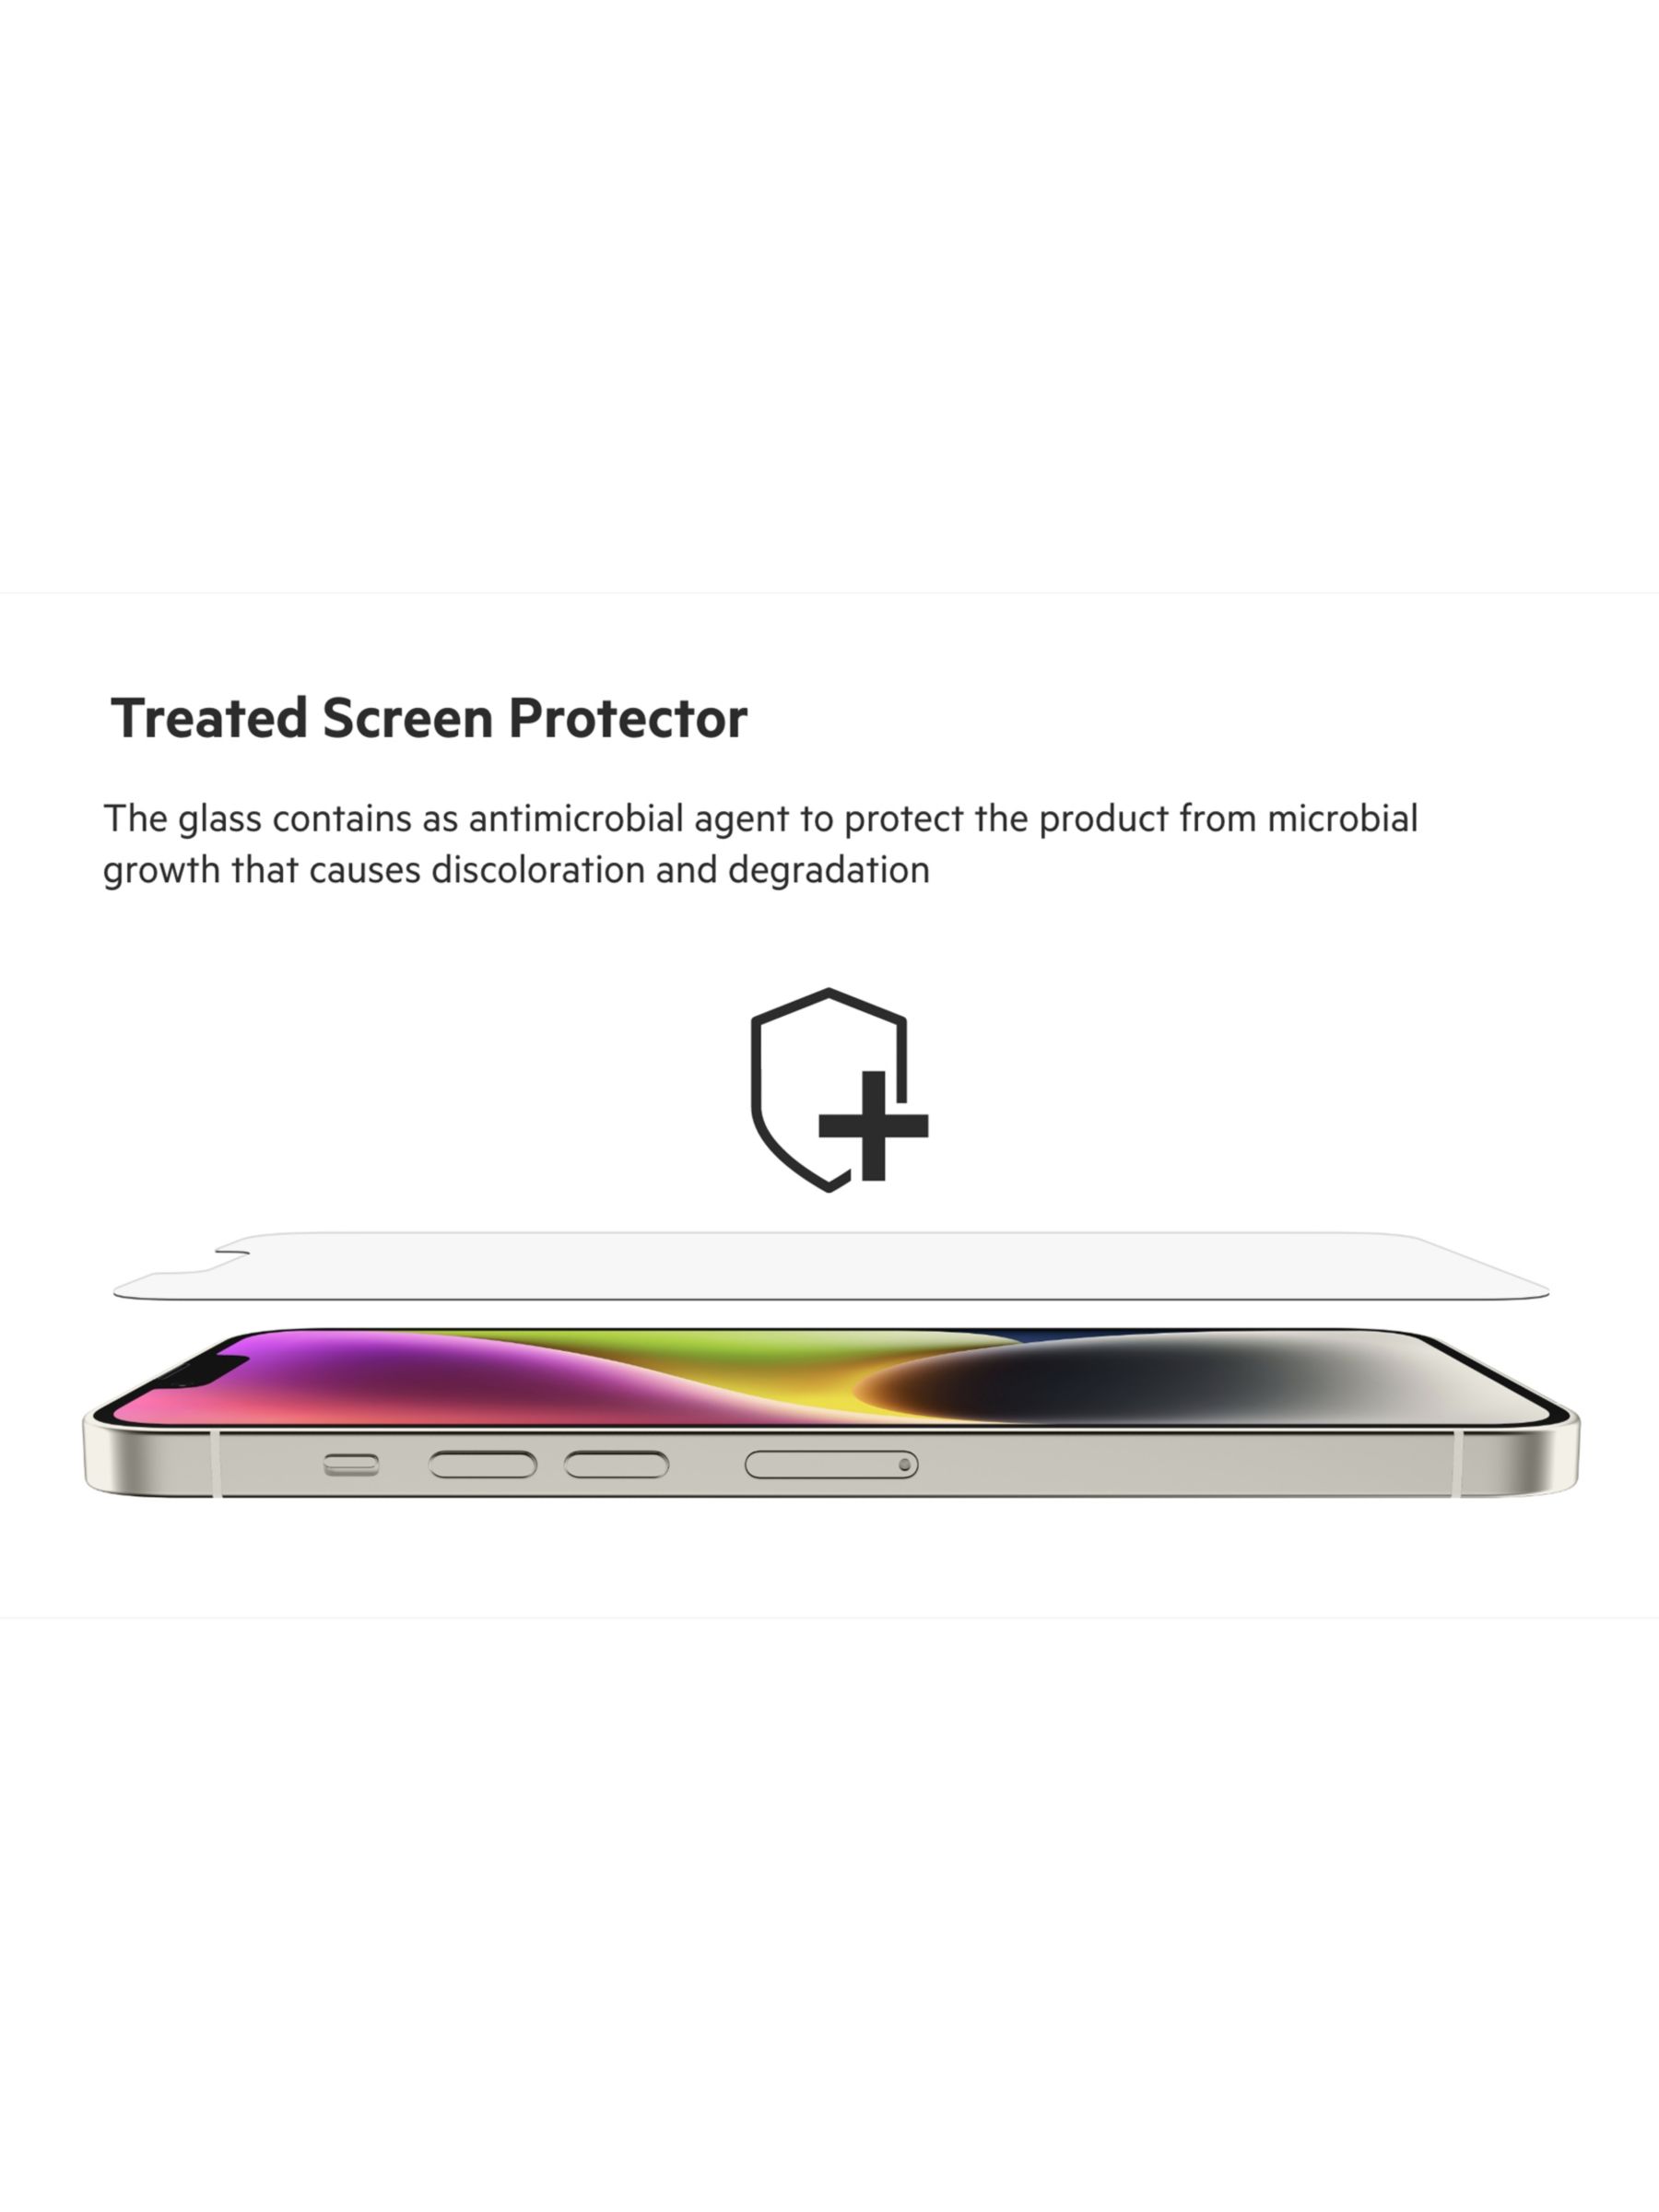 UltraGlass 2 Treated Screen Protector for iPhone 15 Pro